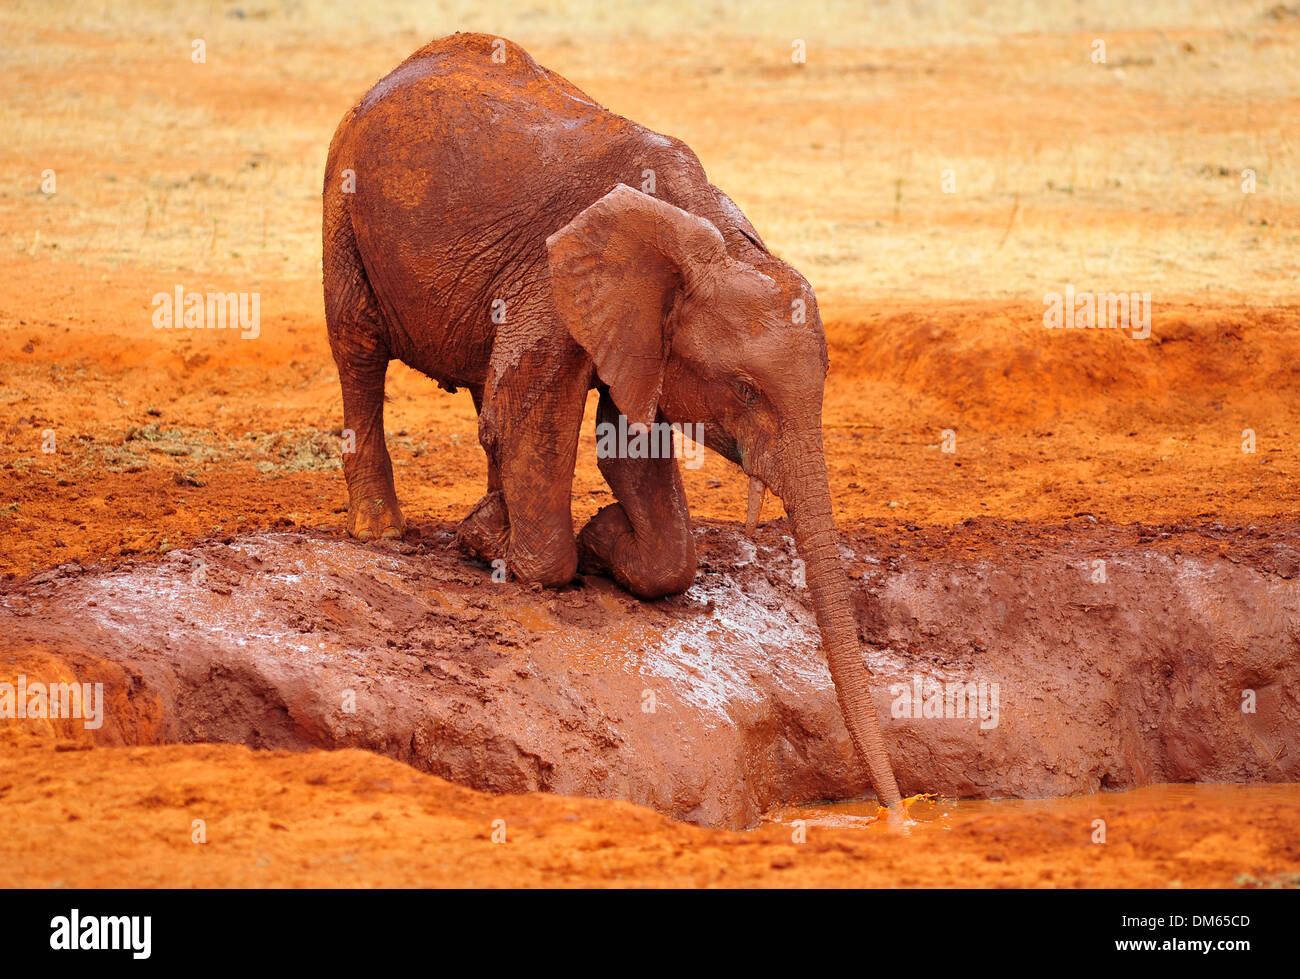 baby elephant drinking out of a source Stock Photo